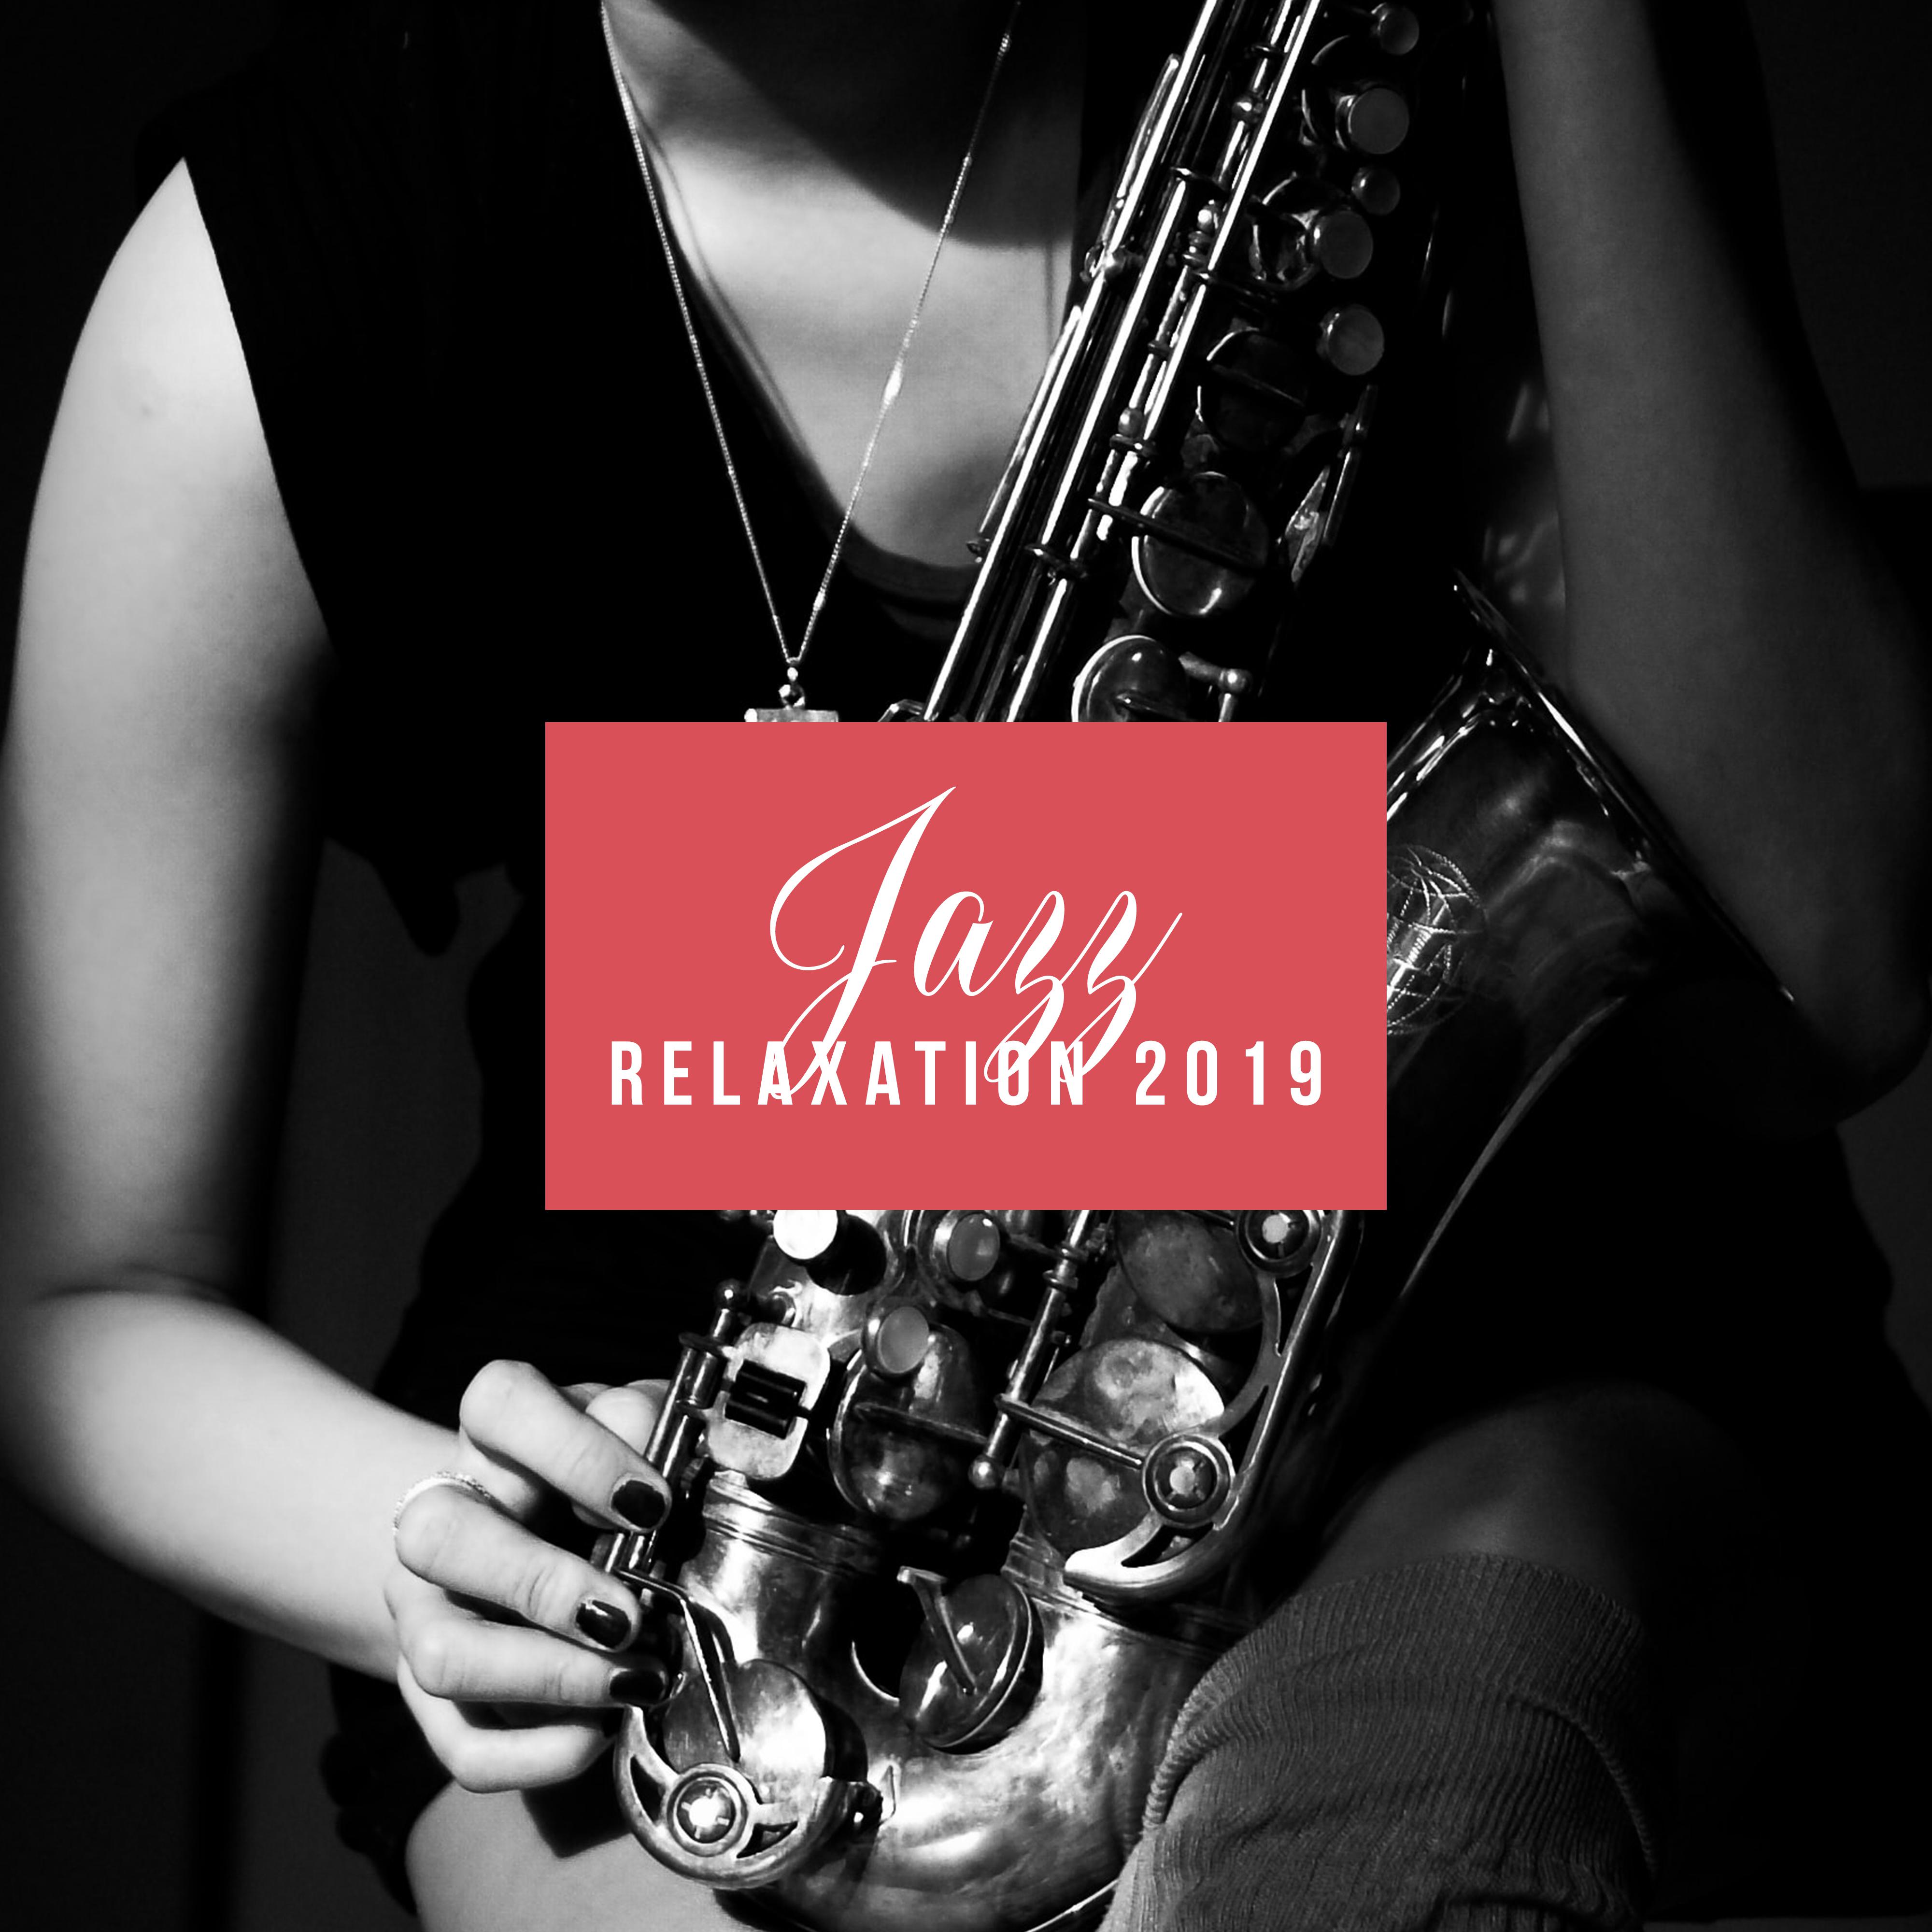 Jazz Relaxation 2019: Smooth Music to Rest, Jazz Coffee, Evening Jazz Relaxation, Instrumental Jazz Music Ambient, Relax After Work